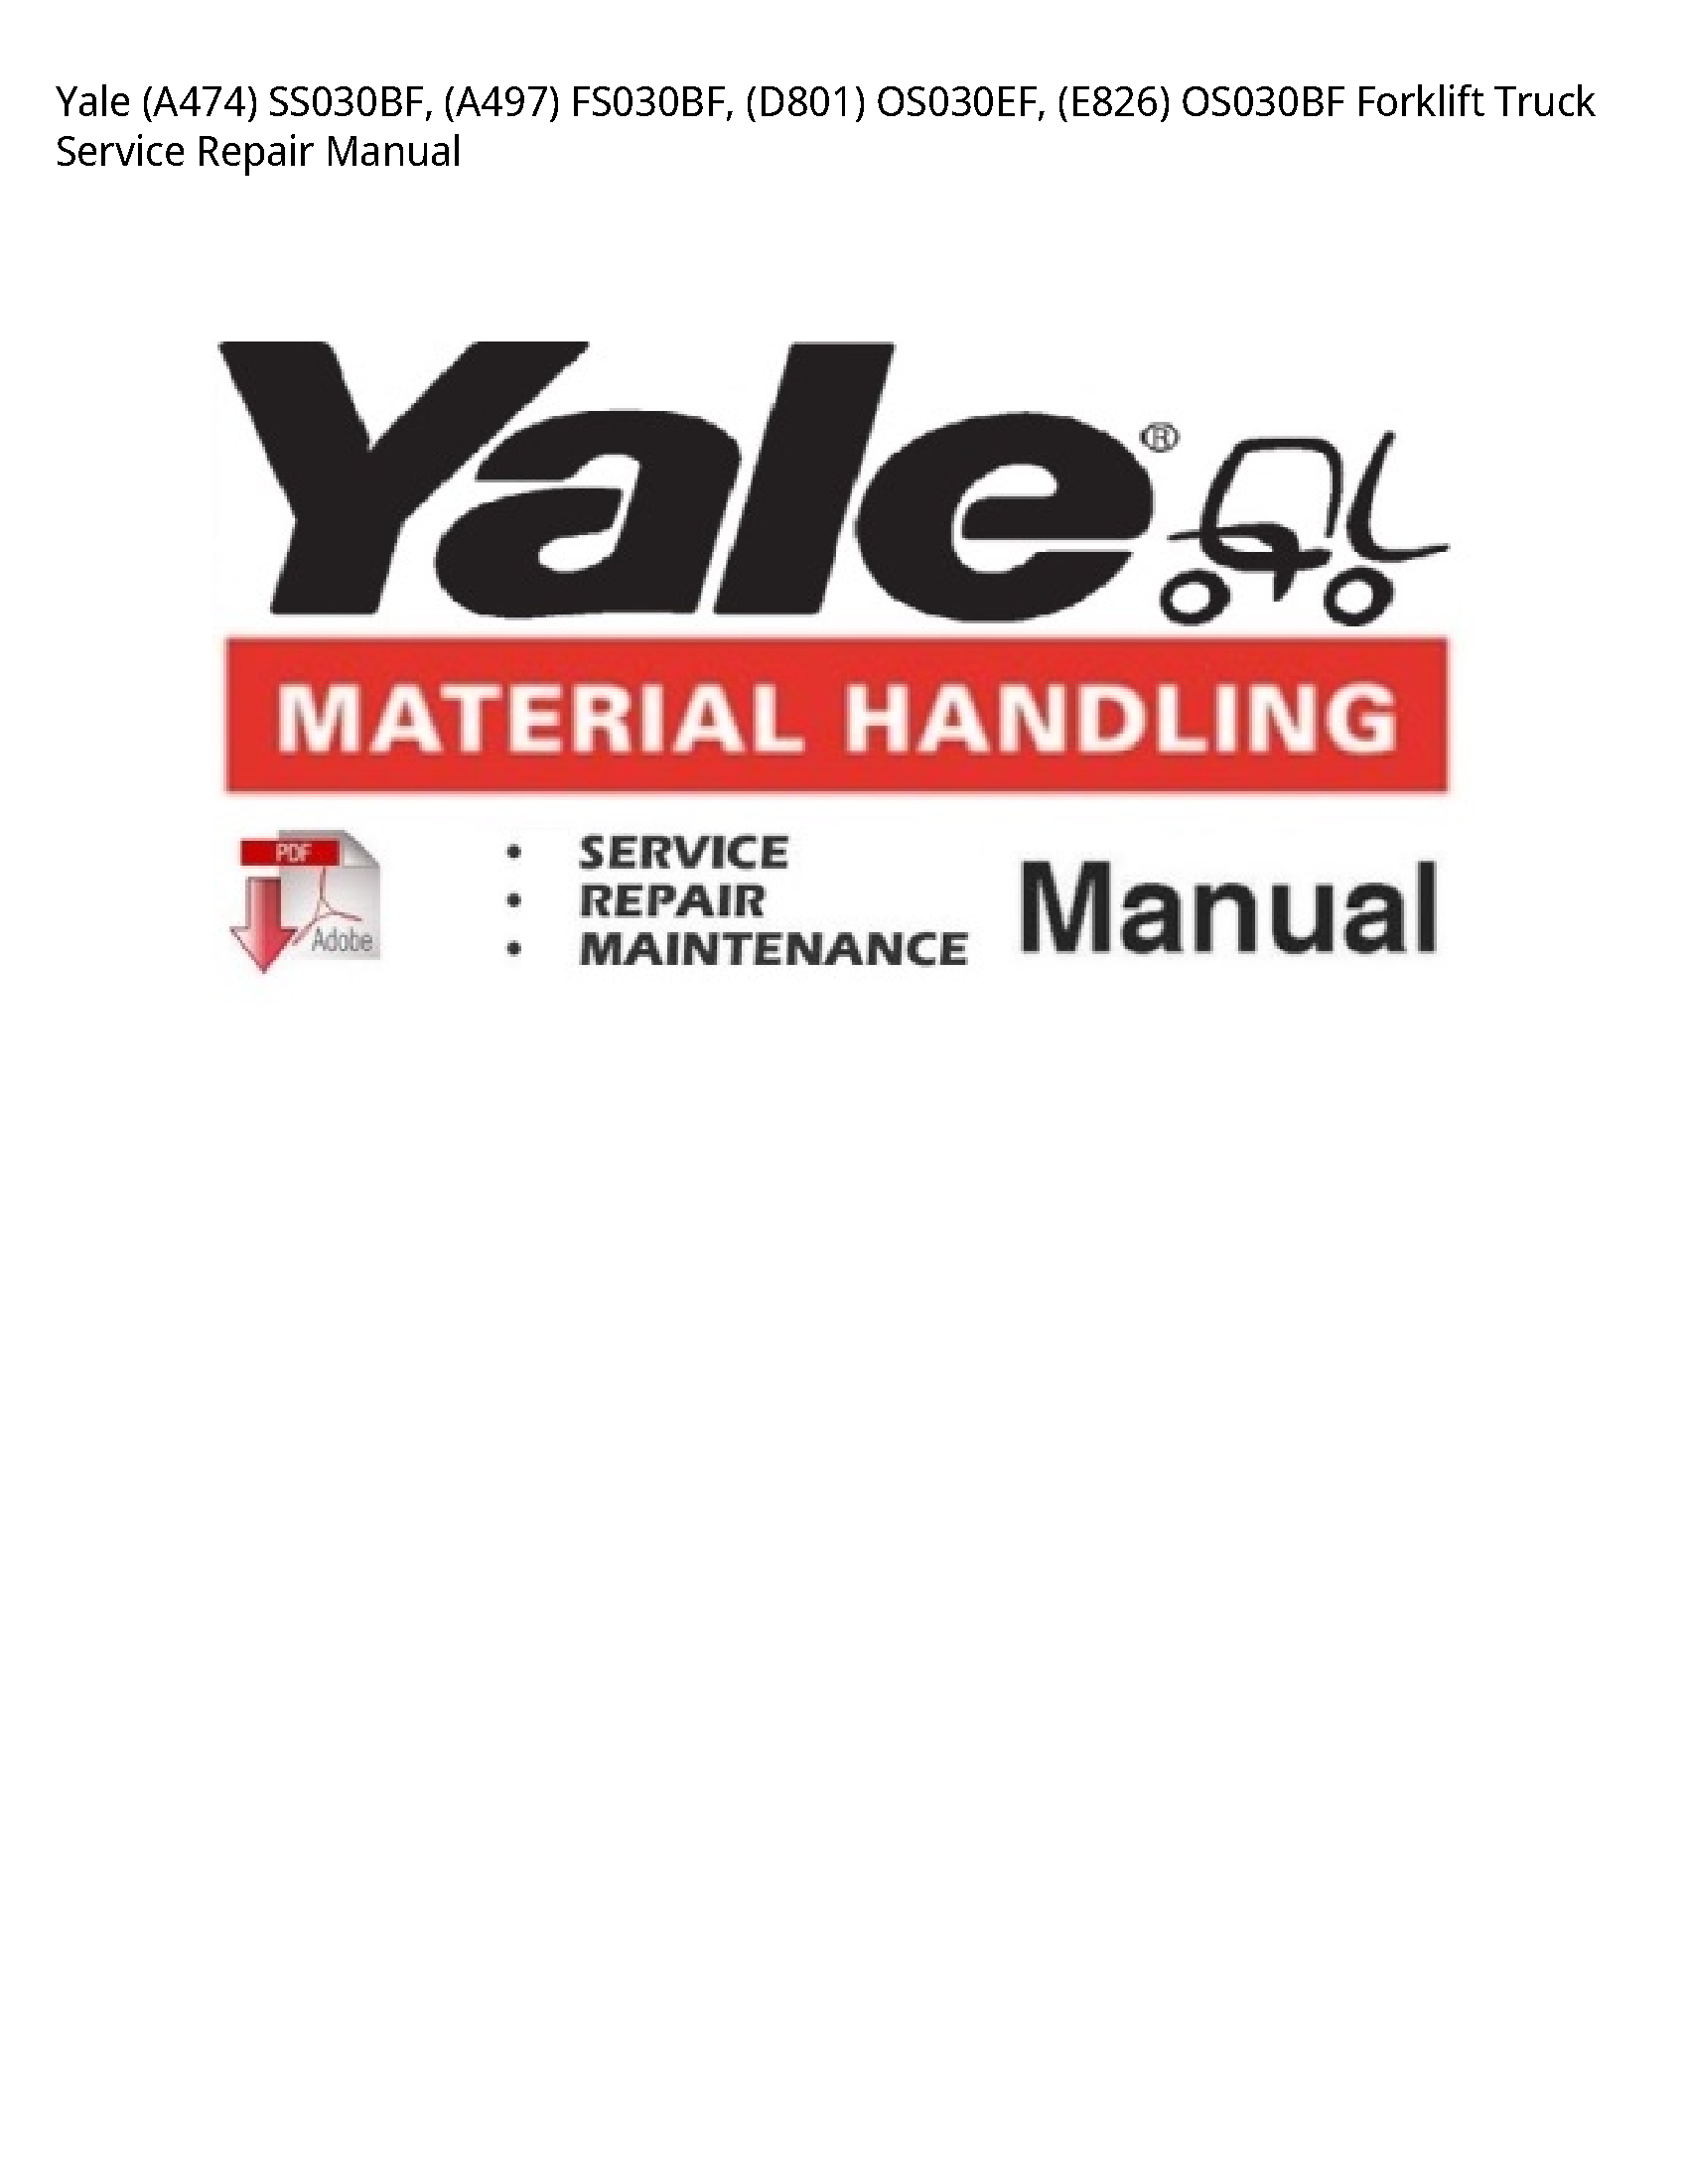 Yale (A474) Forklift Truck manual